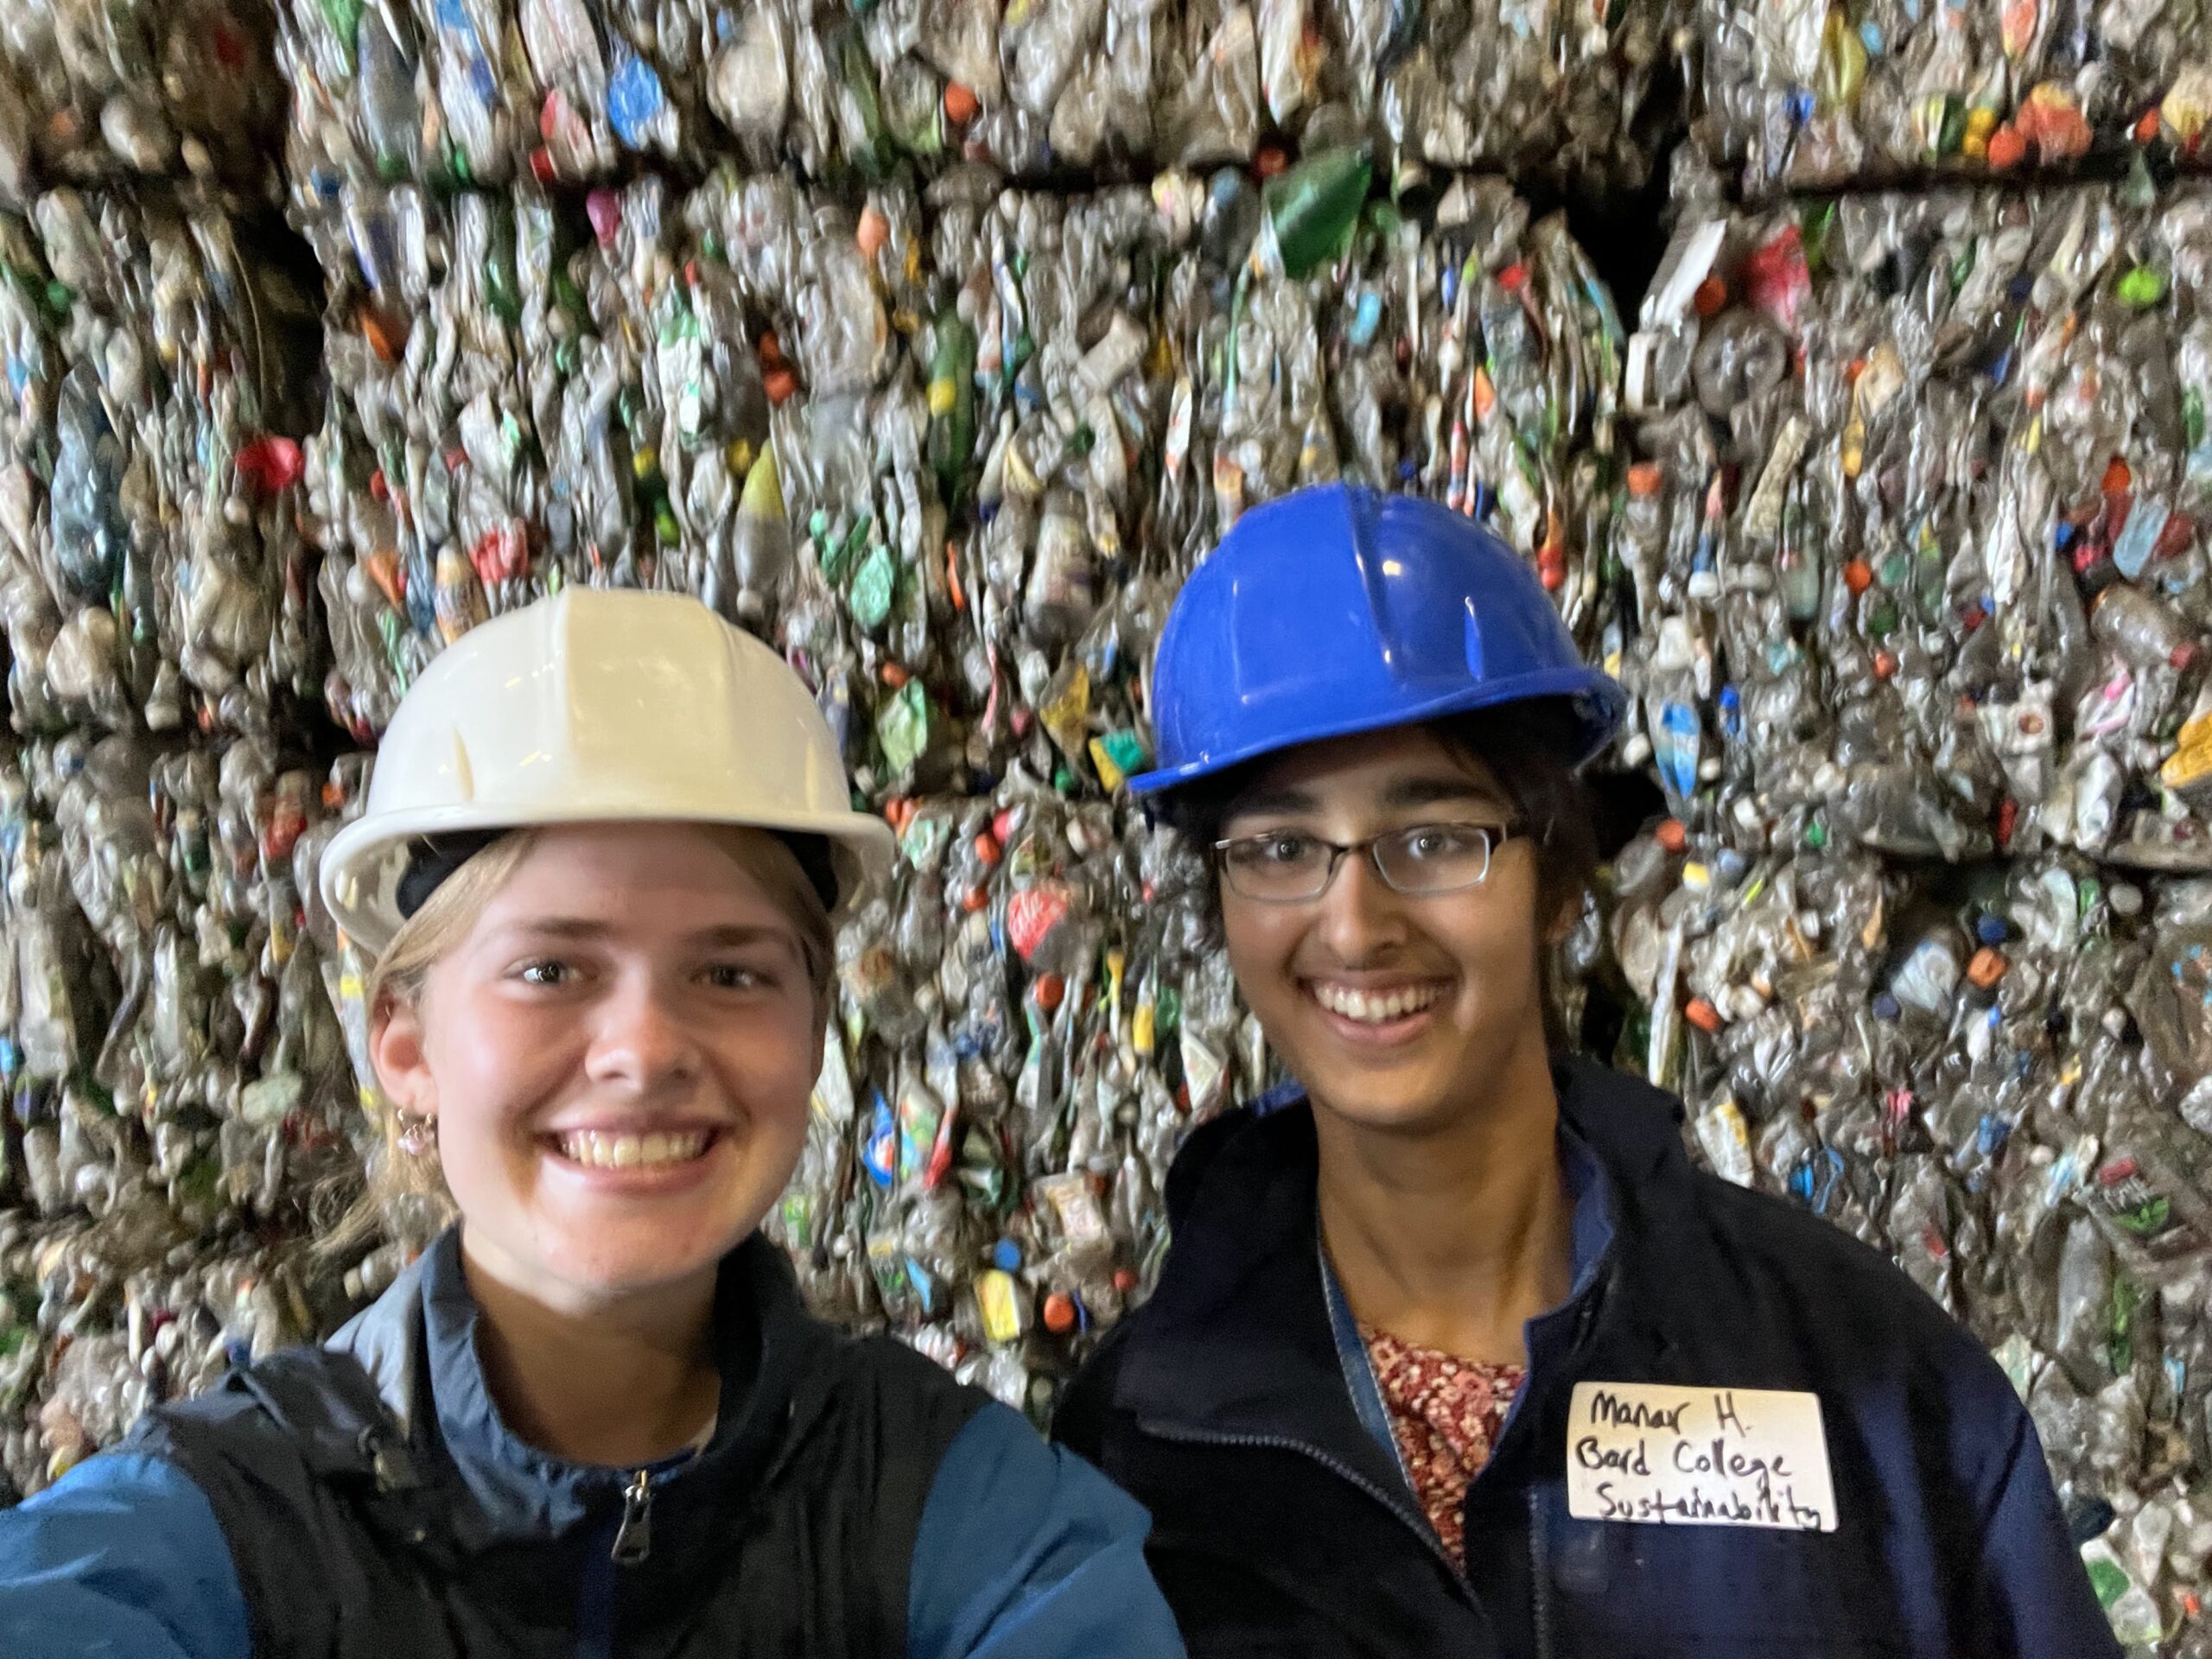 Two young people wearing hard hats smile for a selfie in front of compressed blocks of recycled materials.